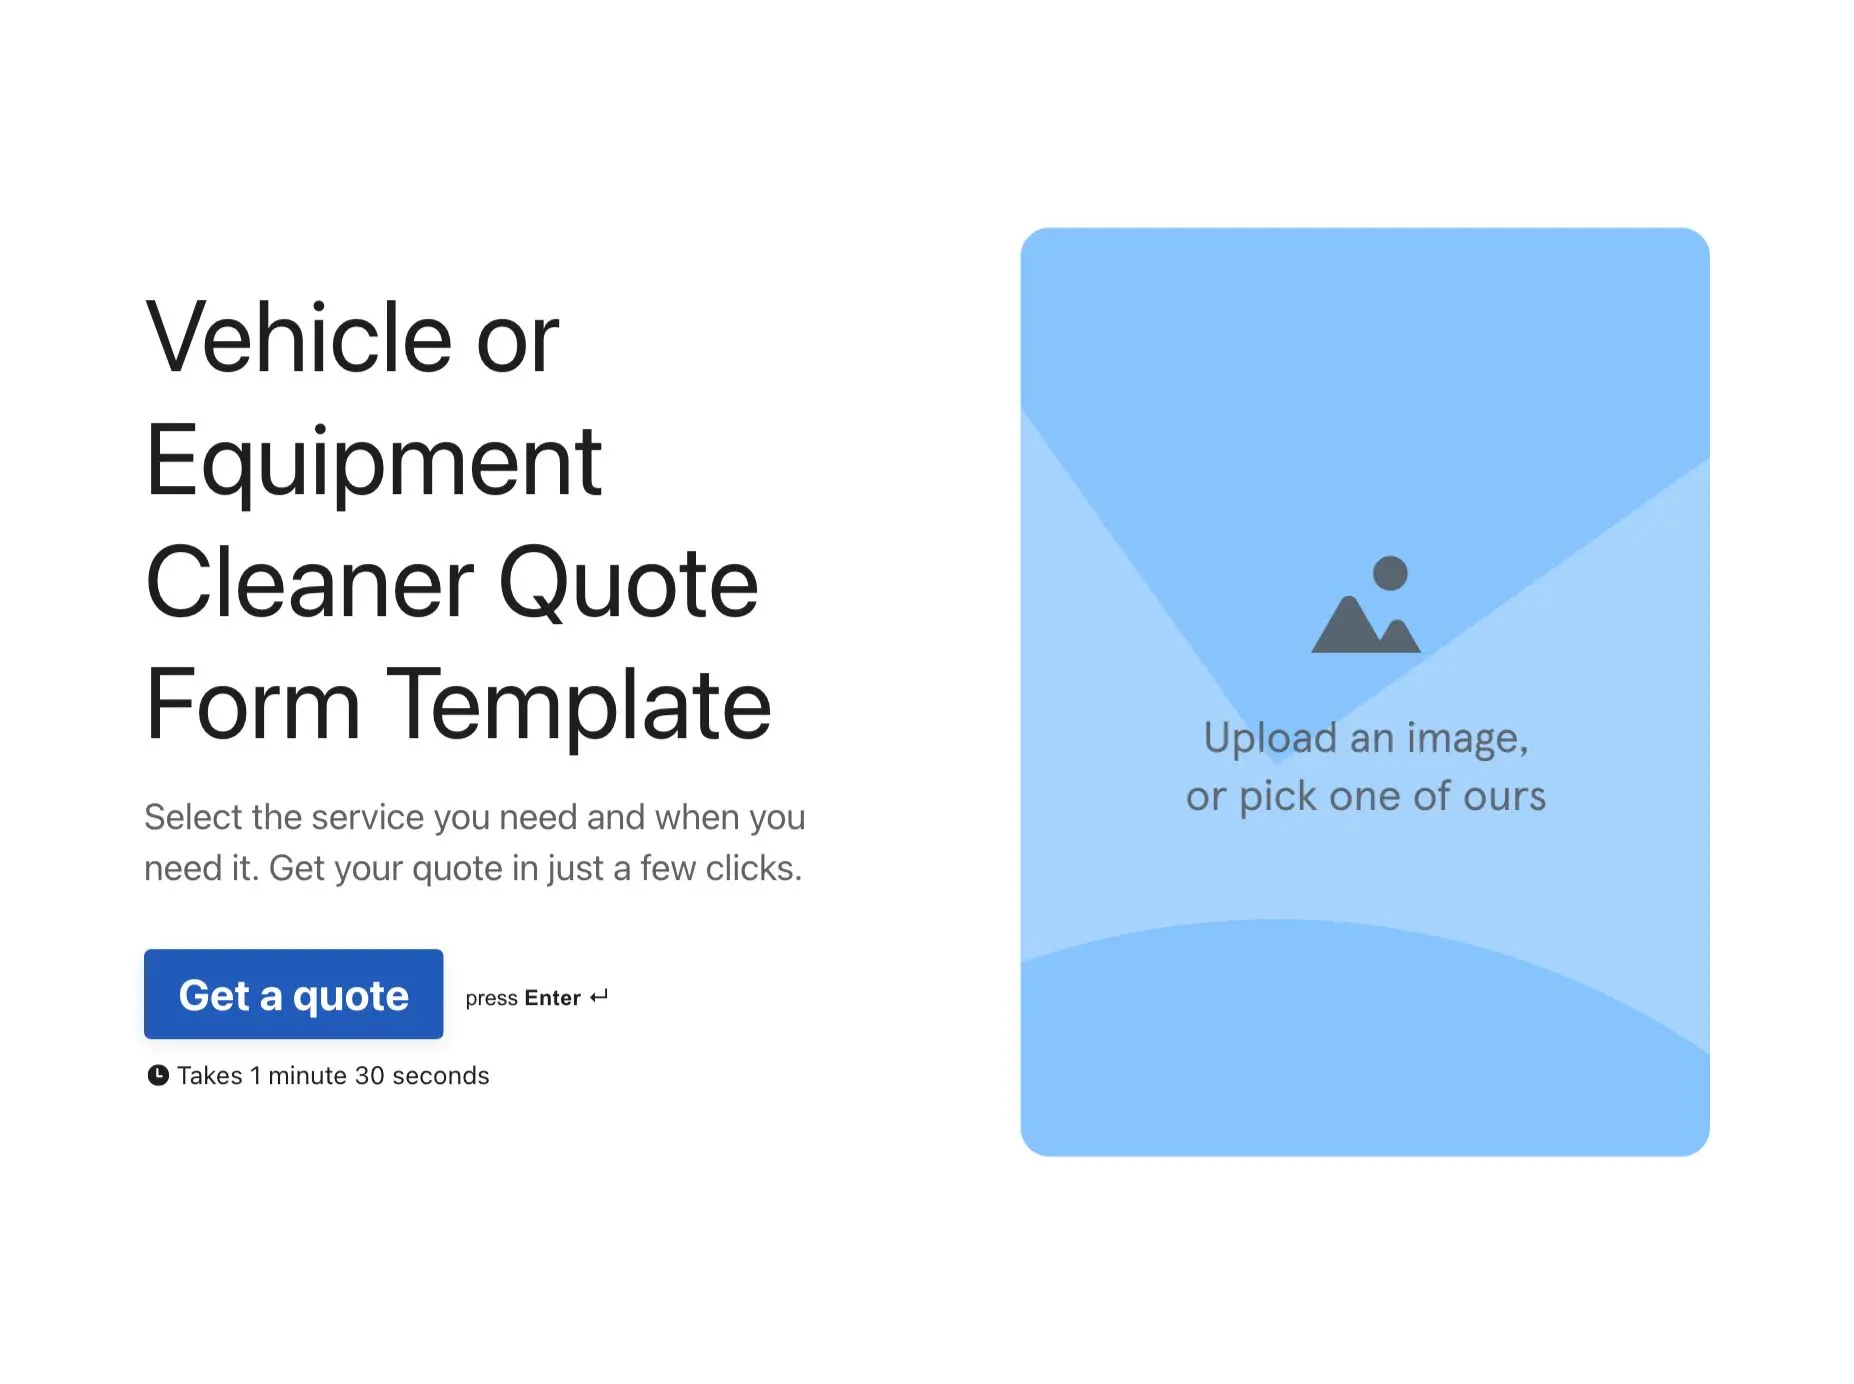 Vehicle or Equipment Cleaner Quote Form Template Hero